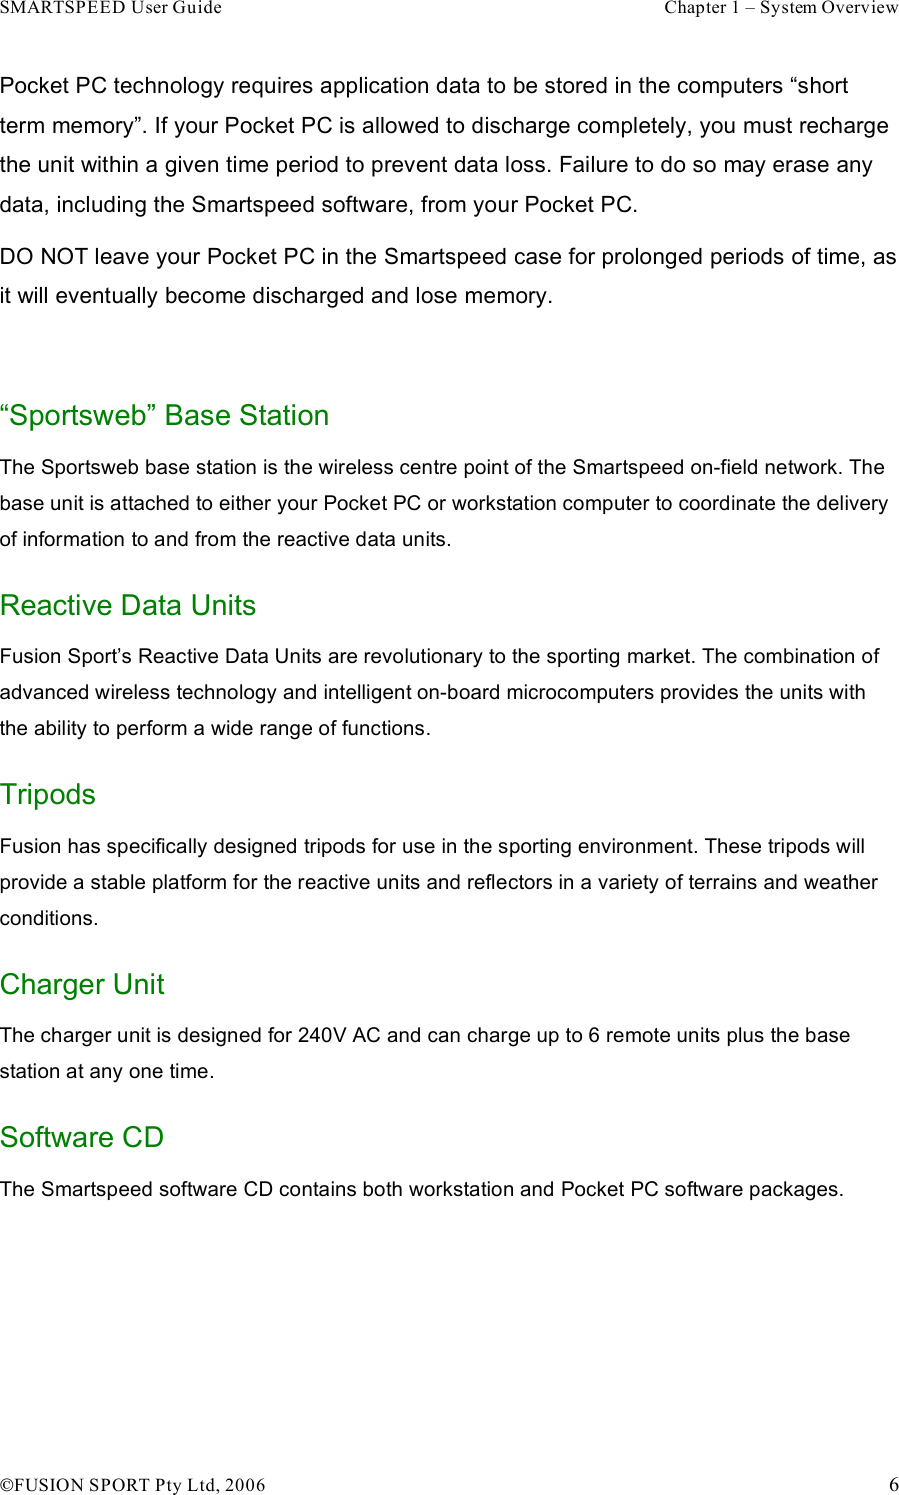 SMARTSPEED User Guide    Chapter 1 – System Overview !FUSION SPORT Pty Ltd, 2006    6 Pocket PC technology requires application data to be stored in the computers “short term memory”. If your Pocket PC is allowed to discharge completely, you must recharge the unit within a given time period to prevent data loss. Failure to do so may erase any data, including the Smartspeed software, from your Pocket PC. DO NOT leave your Pocket PC in the Smartspeed case for prolonged periods of time, as it will eventually become discharged and lose memory.   “Sportsweb” Base Station The Sportsweb base station is the wireless centre point of the Smartspeed on-field network. The base unit is attached to either your Pocket PC or workstation computer to coordinate the delivery of information to and from the reactive data units. Reactive Data Units Fusion Sport’s Reactive Data Units are revolutionary to the sporting market. The combination of advanced wireless technology and intelligent on-board microcomputers provides the units with the ability to perform a wide range of functions. Tripods Fusion has specifically designed tripods for use in the sporting environment. These tripods will provide a stable platform for the reactive units and reflectors in a variety of terrains and weather conditions. Charger Unit The charger unit is designed for 240V AC and can charge up to 6 remote units plus the base station at any one time. Software CD The Smartspeed software CD contains both workstation and Pocket PC software packages.     